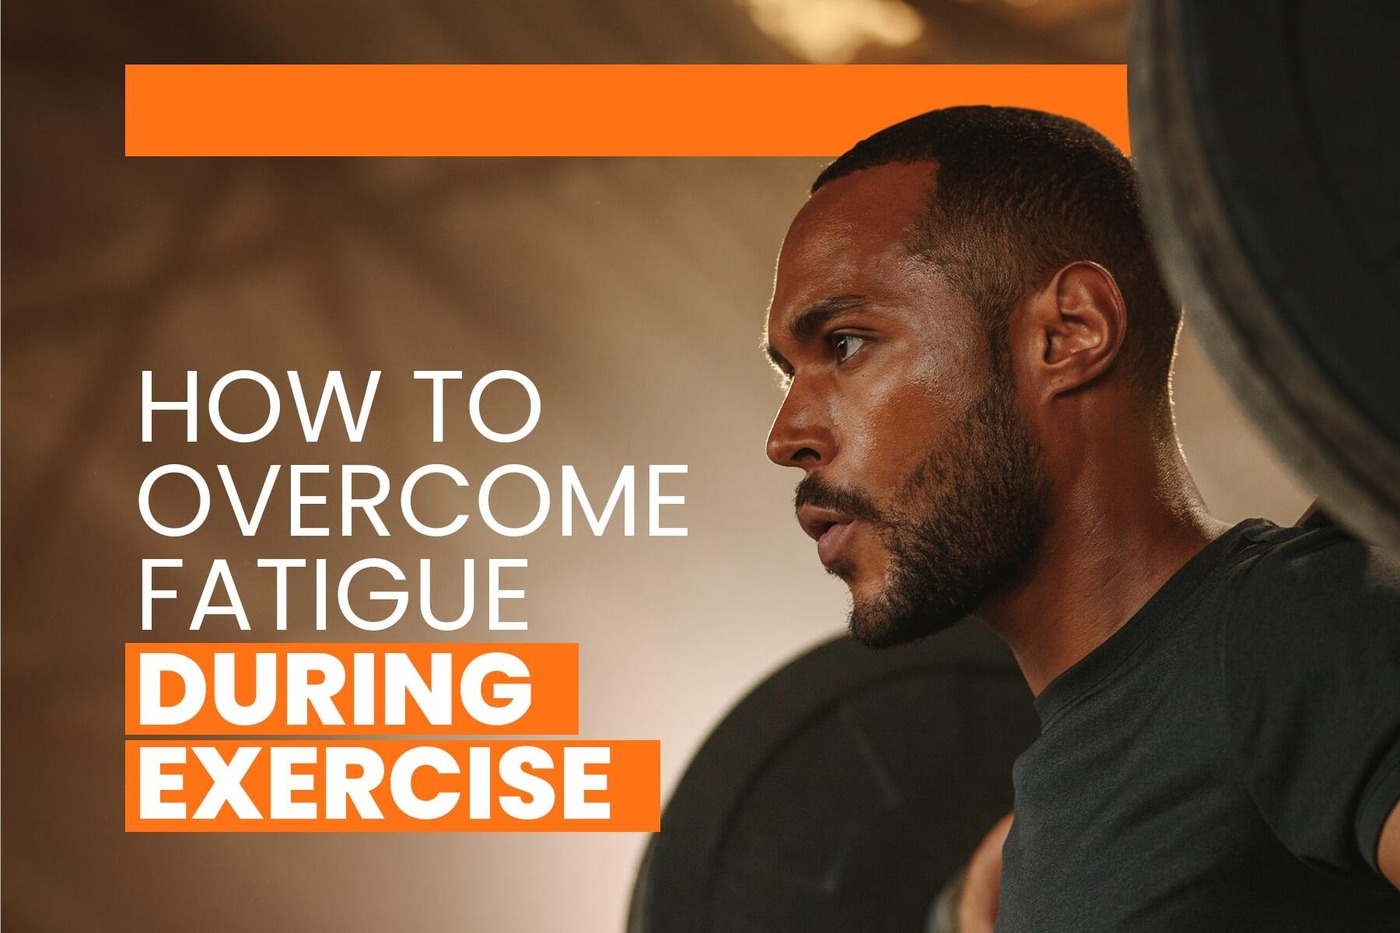 How to overcome fatigue during exercise